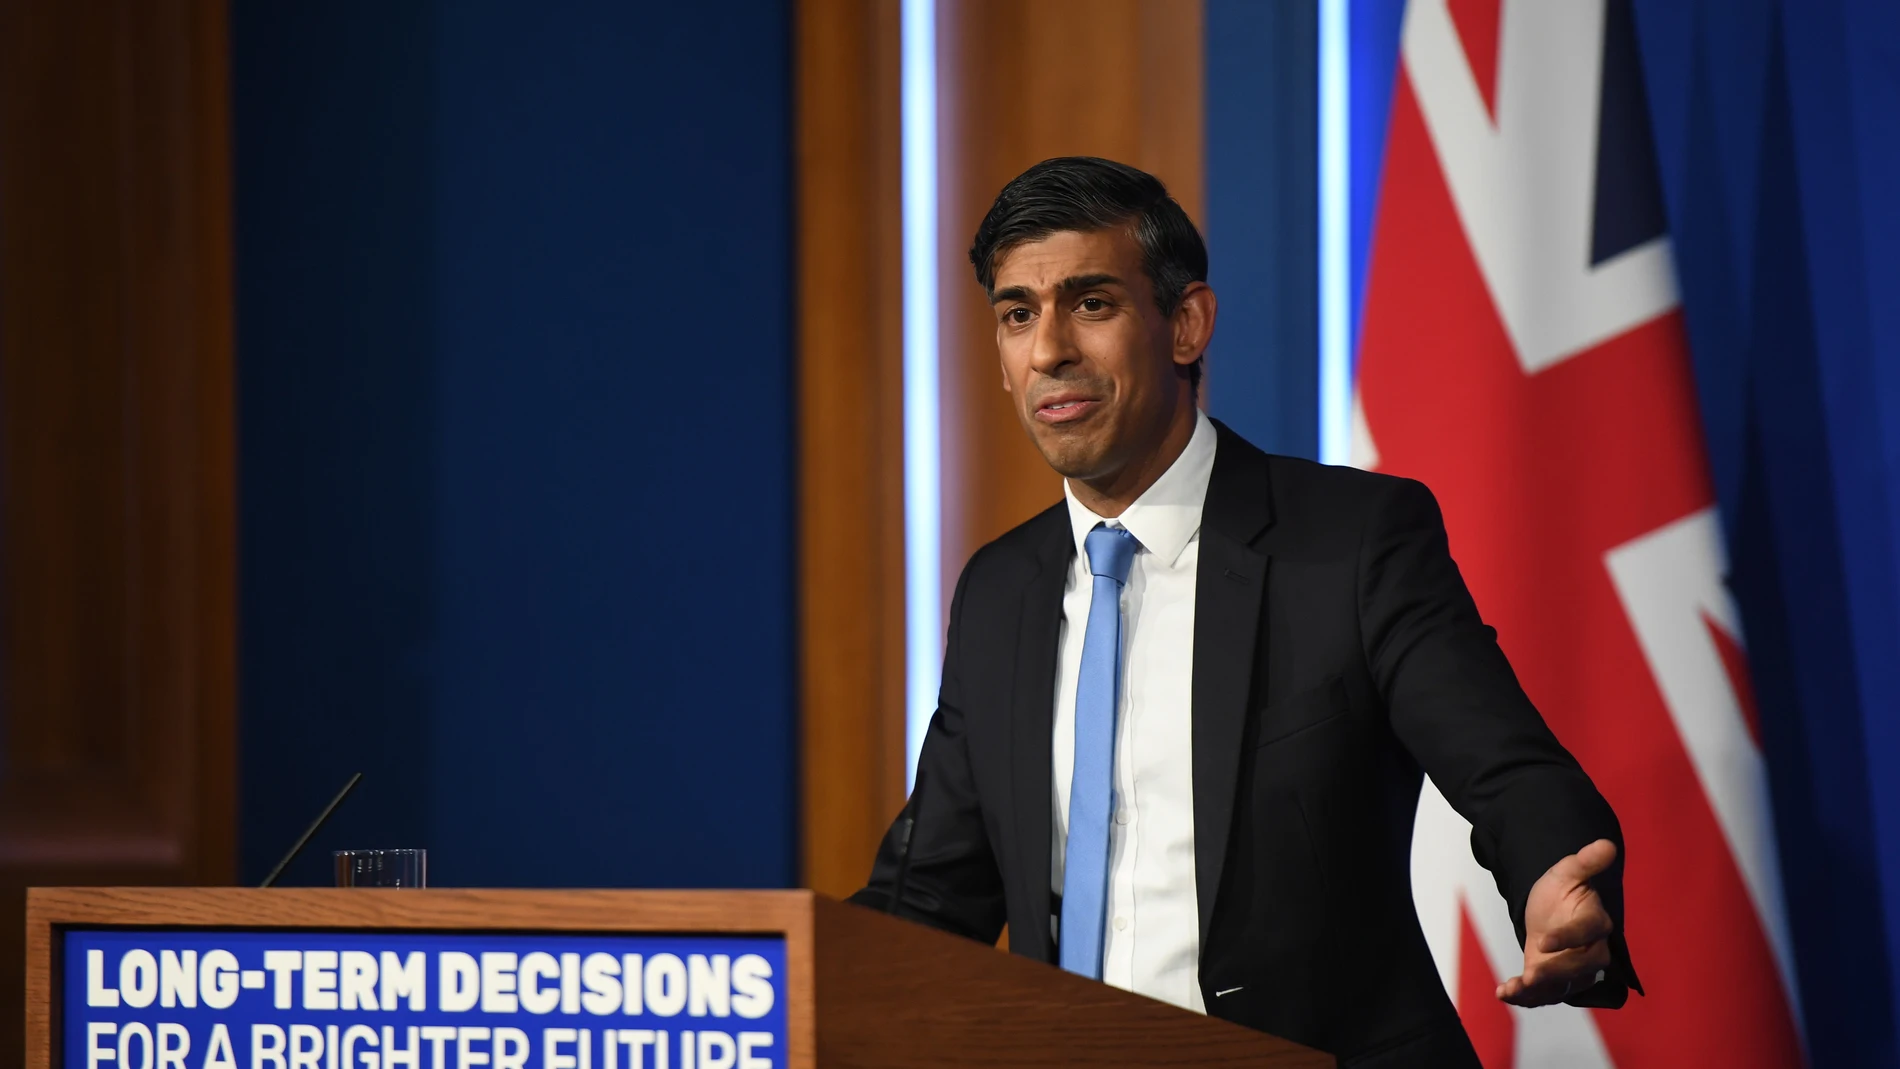 London (United Kingdom), 20/09/2023.- The United Kingdom's Priime Minister Rishi Sunak speaks at a news conference in Downing Street, London, Britain, 20 September 2023. Sunak was told weeks before deciding to roll back his green policies that he risked jeopardizing Britain's place as global leader on climate as well as his legally binding net zero goal. (Reino Unido, Londres) EFE/EPA/Chris J. Ratcliffe / POOL 